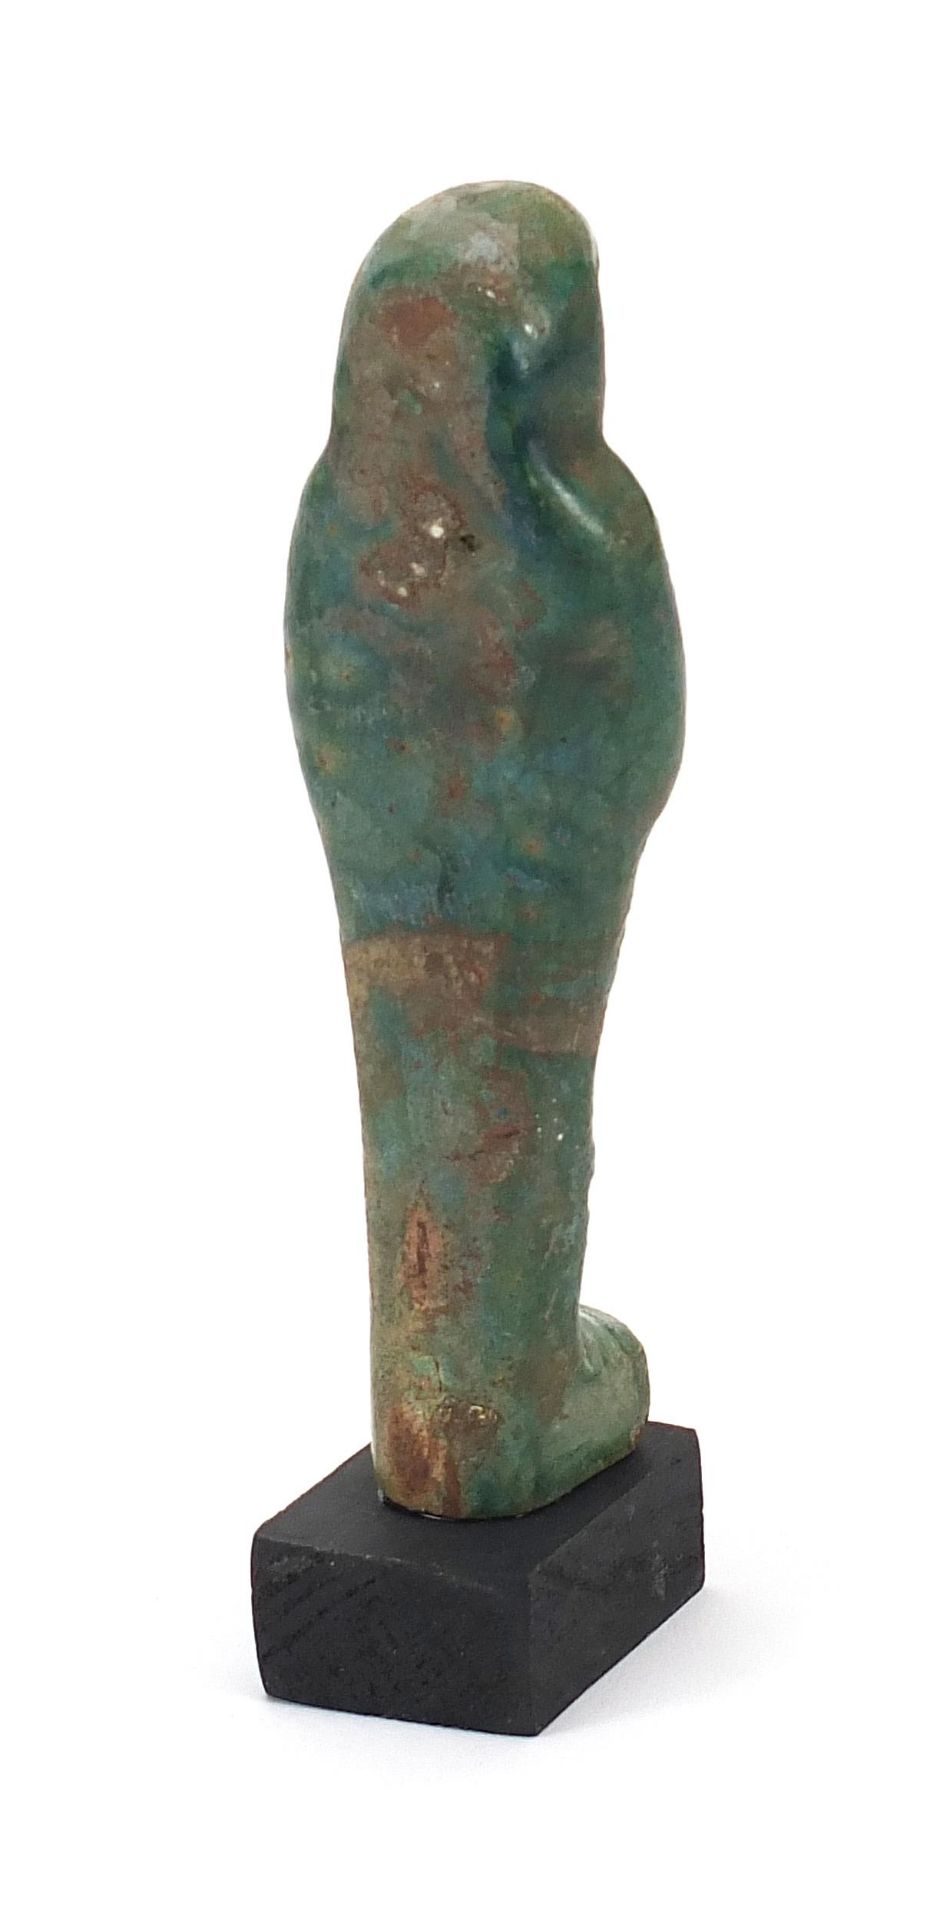 Egyptian style ushabti raised on a wooden base, overall 16.5cm high - Image 2 of 3